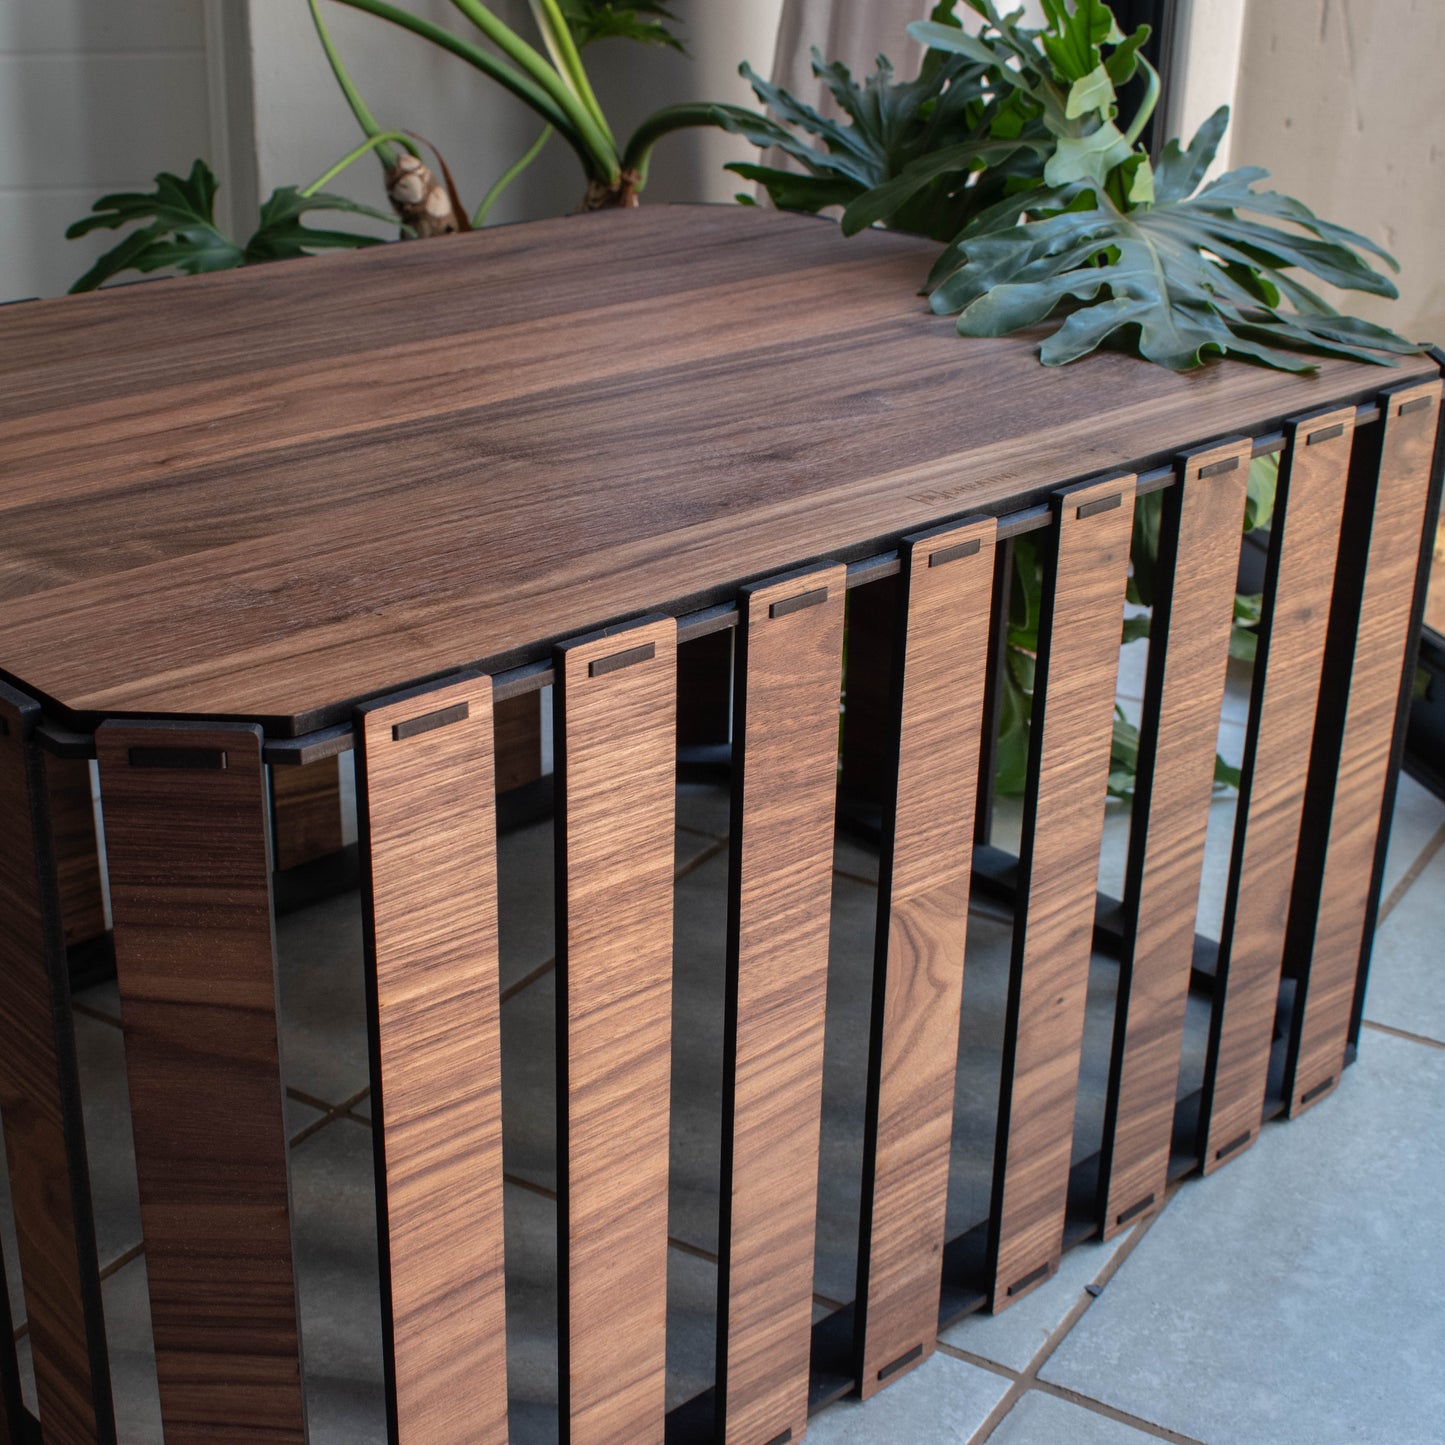 Slatted Square Coffee Table